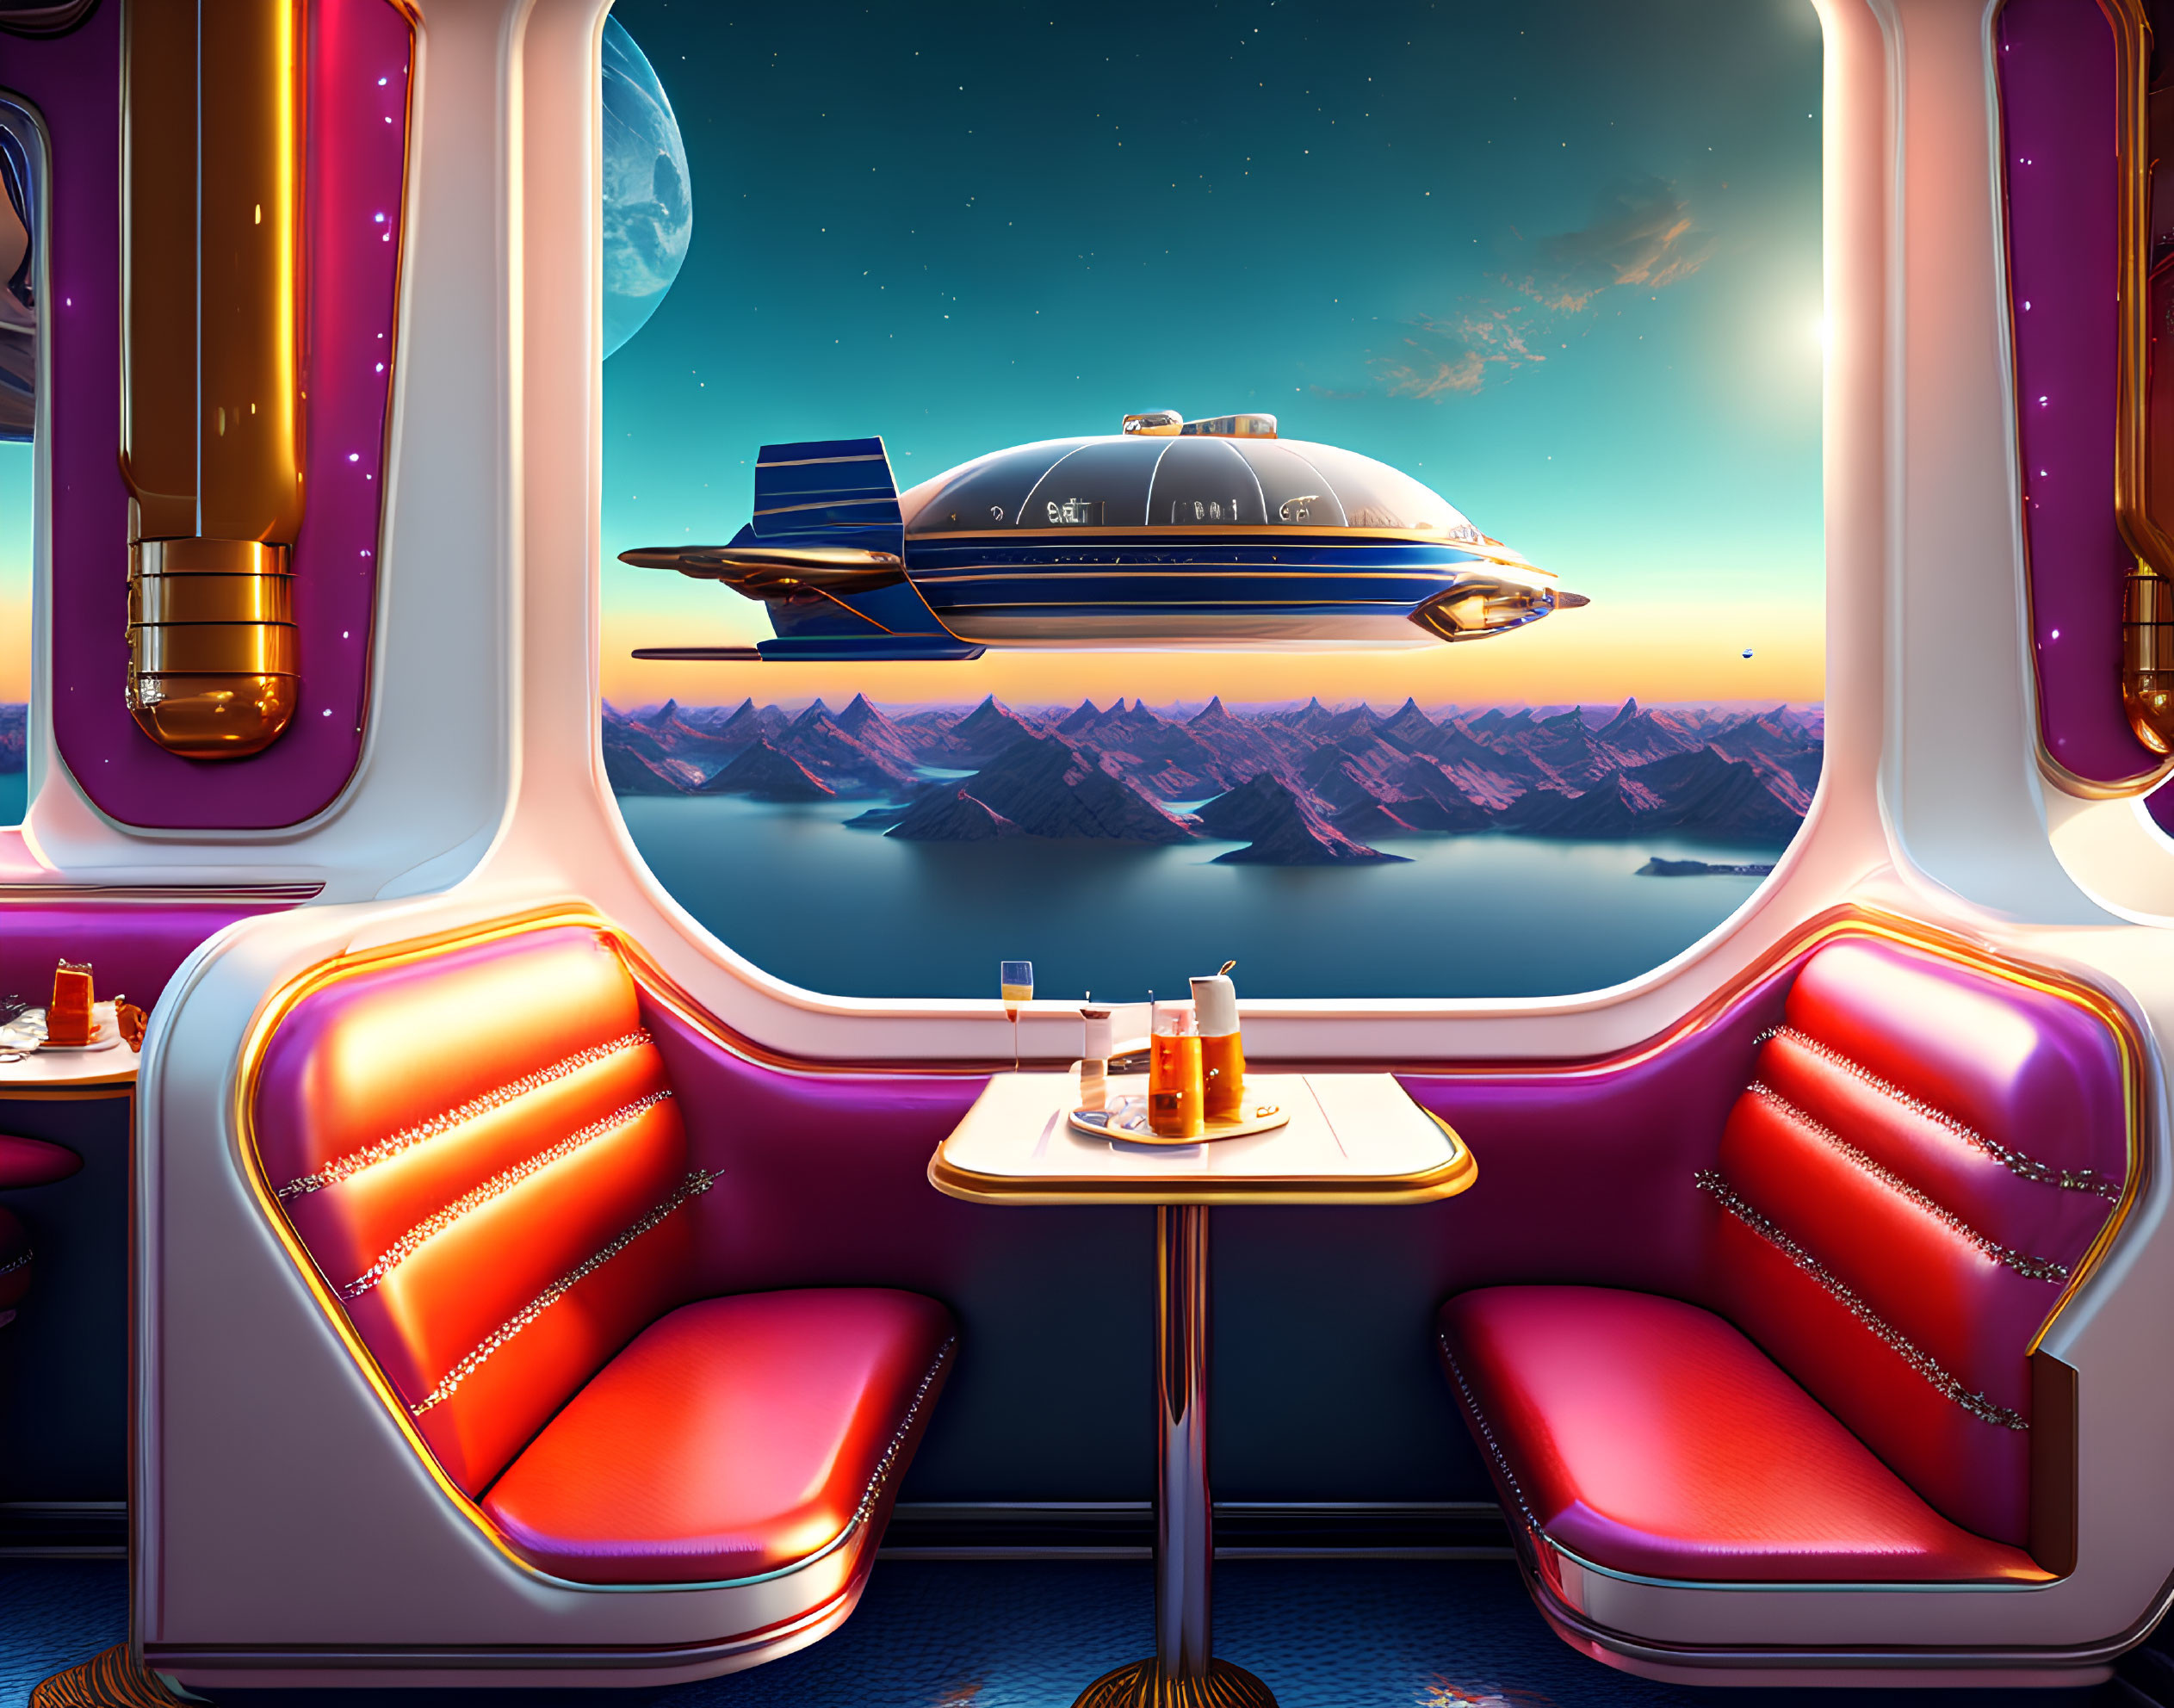 Futuristic spacecraft interior with red seats, table, mountain view, and flying vehicle.